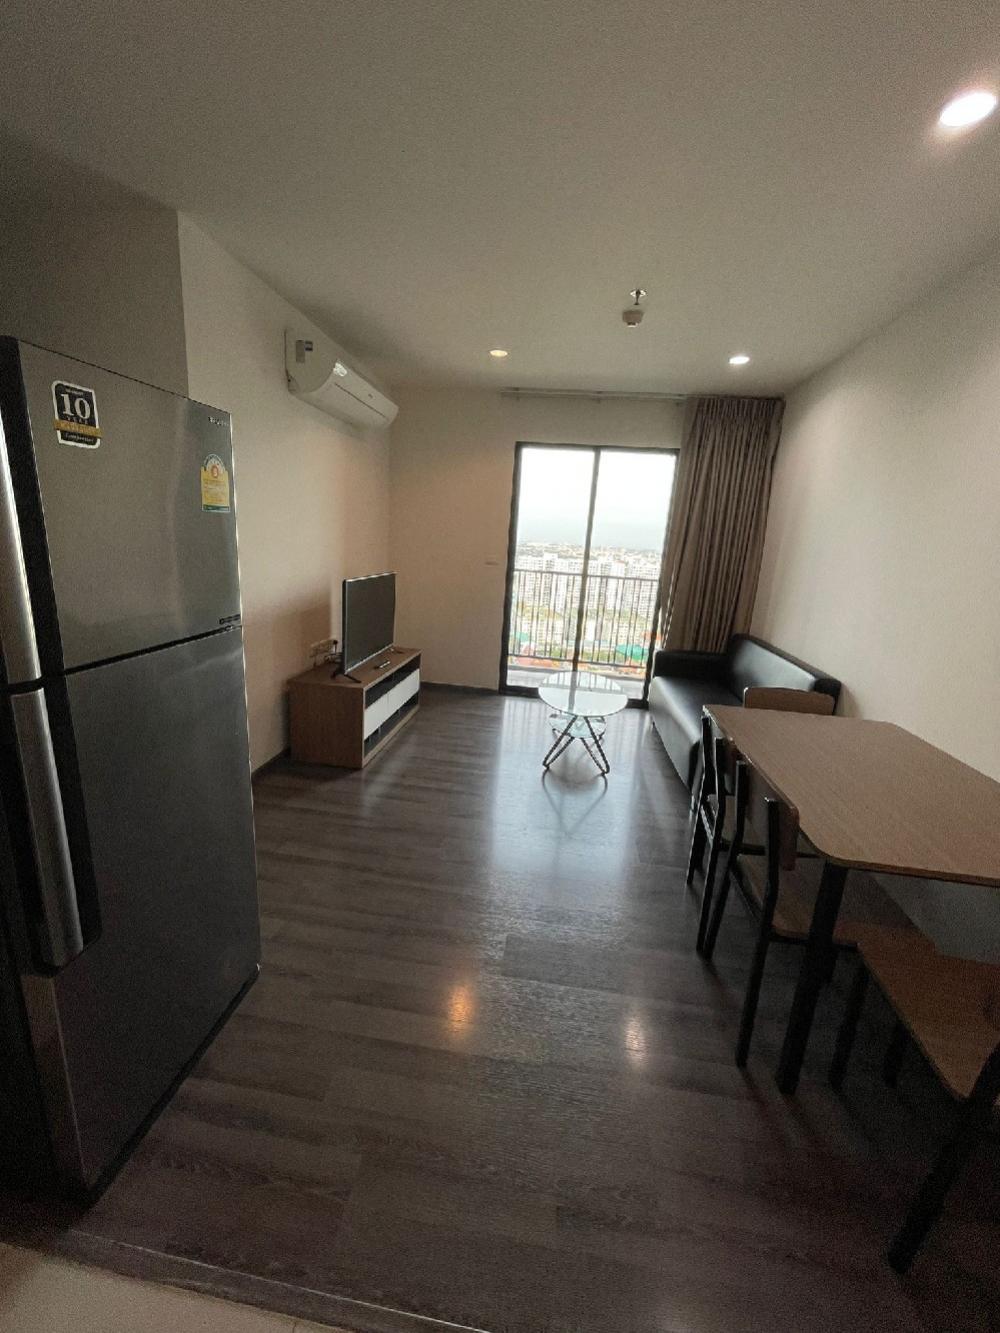 For RentCondoOnnut, Udomsuk : “ READY TO MOVE IN 2BEDROOMS WITH CLEAR VIEW NEAR ON NUT BTS “